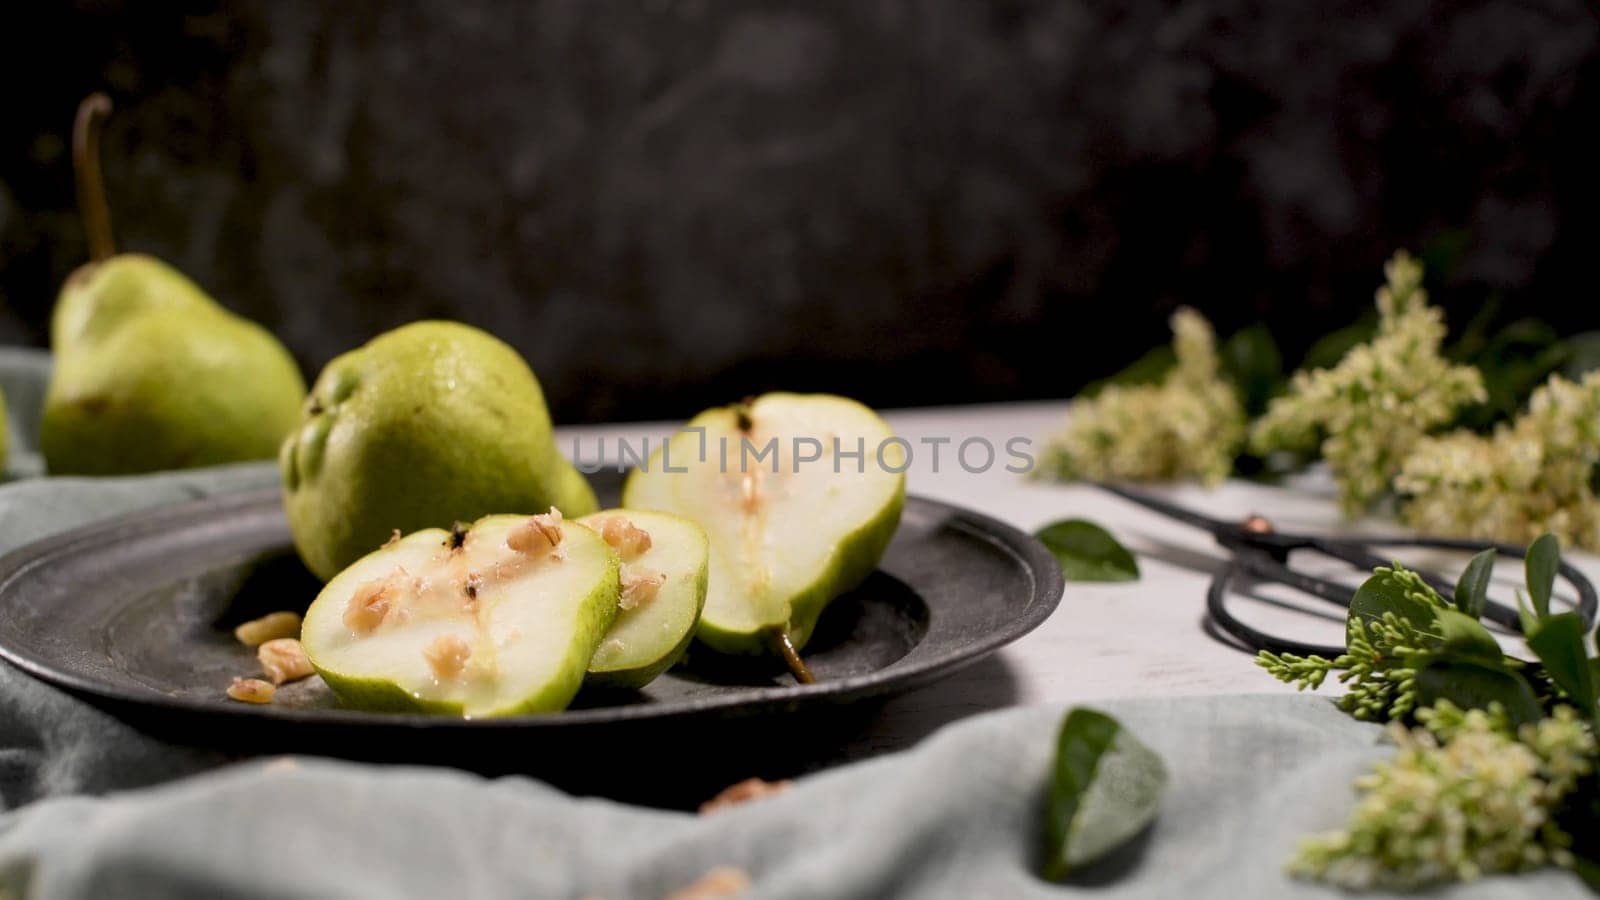 Metal plate with delicious ripe pears on table.